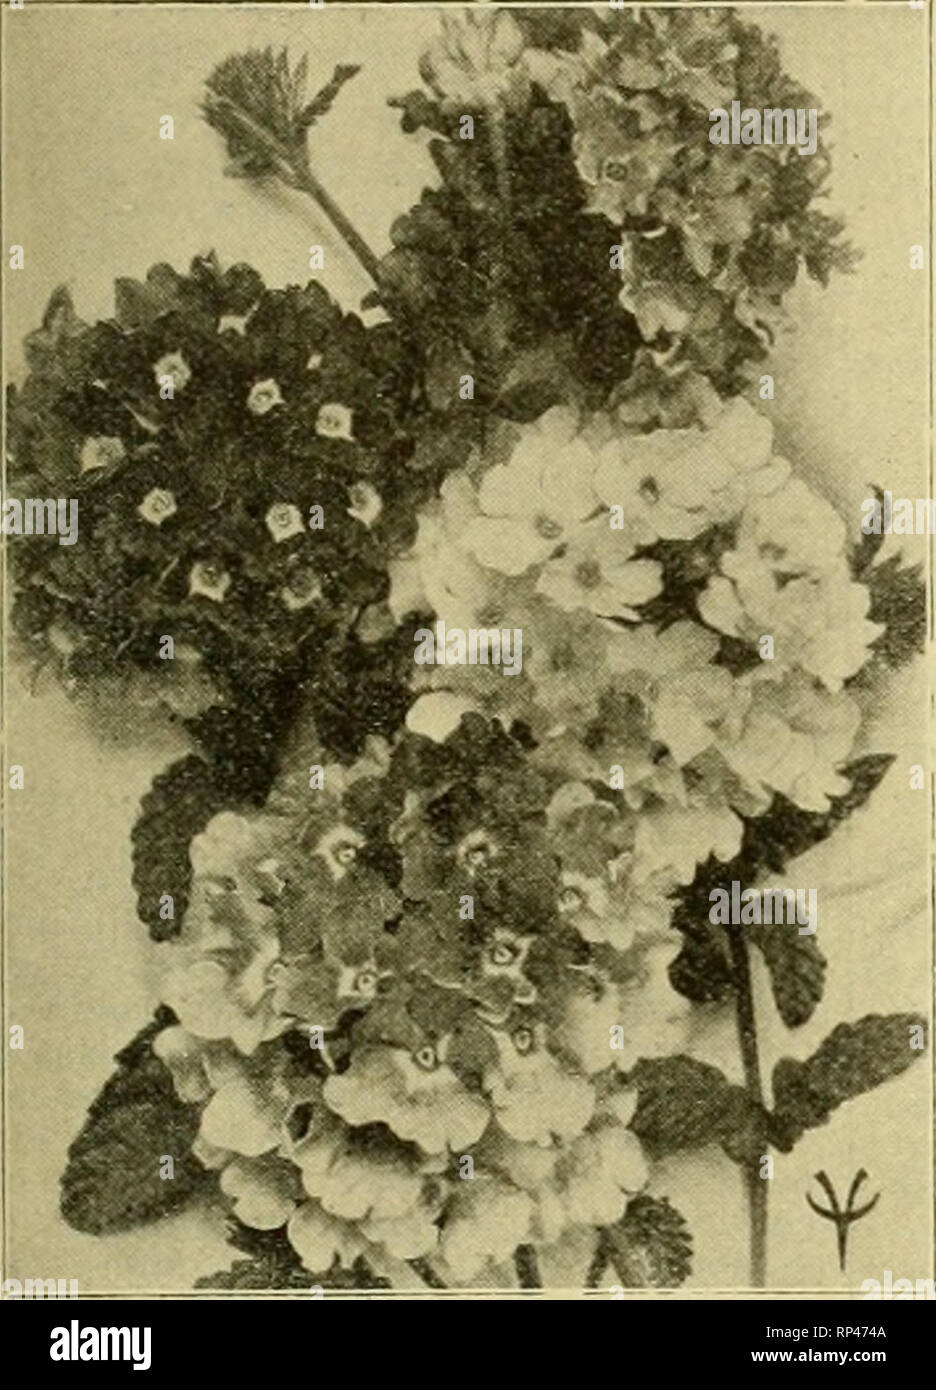 . The American florist : a weekly journal for the trade. Floriculture; Florists. 1919. The American Florist. 131 Vaughan's Flower Seeds for Sowing Now. Extracts from *'Florists' January Price List,&quot; just issued. Ask For It.. BEGONIA. Trade pkt. Gracilis Luminosa, foliage lustrous red- dish brown, flowers fiery dark scarlet, 1-32 oz.. $1.60 $0.26 Glory de Chatelaine 60 Prima Donna, lar^e triiuspaieut rose flow- ers. 1-32 oz., $1.60 36 Vernon, red leaved and red-Qowered, oz., $3.00, H oz., 60c 16 Erfordia, rosy carmine. 1/32 oz.. 75c 25 BELLIS (Daisy). Trade Pkt. Mammoth Mixture, ^ oz.. 60c Stock Photo